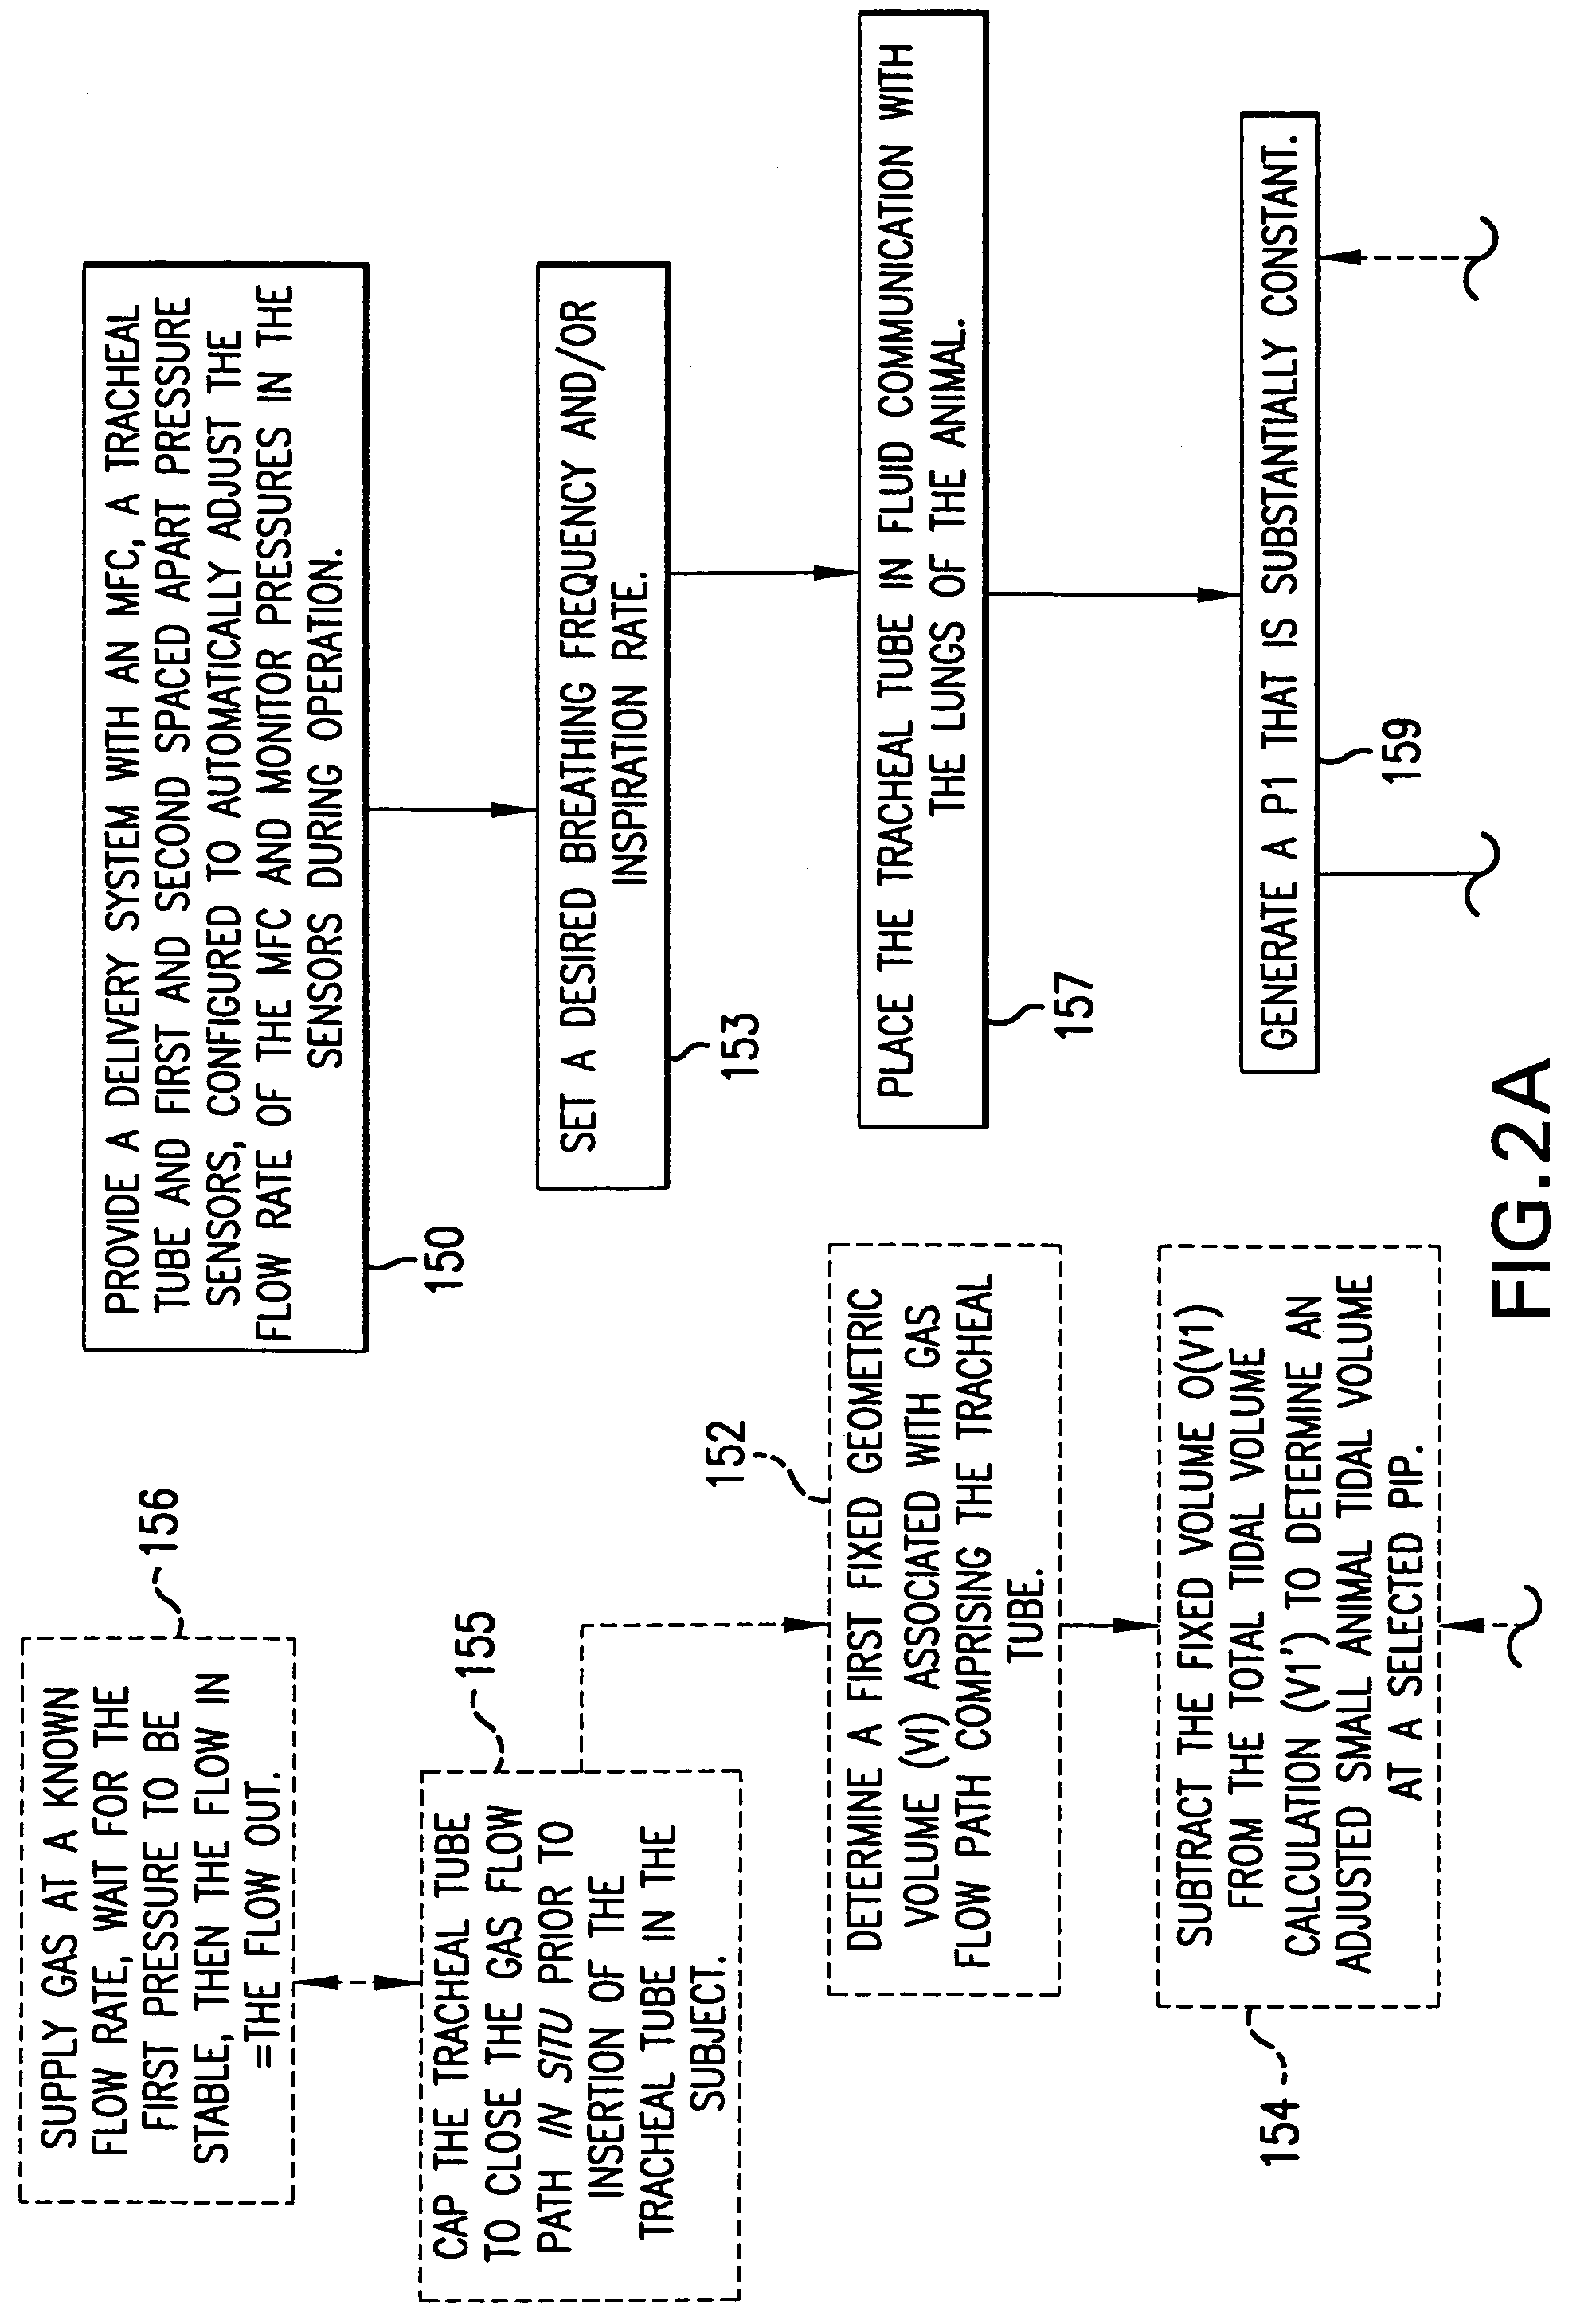 MRI/NMR-compatible, tidal volume control and measurement systems, methods, and devices for respiratory and hyperpolarized gas delivery